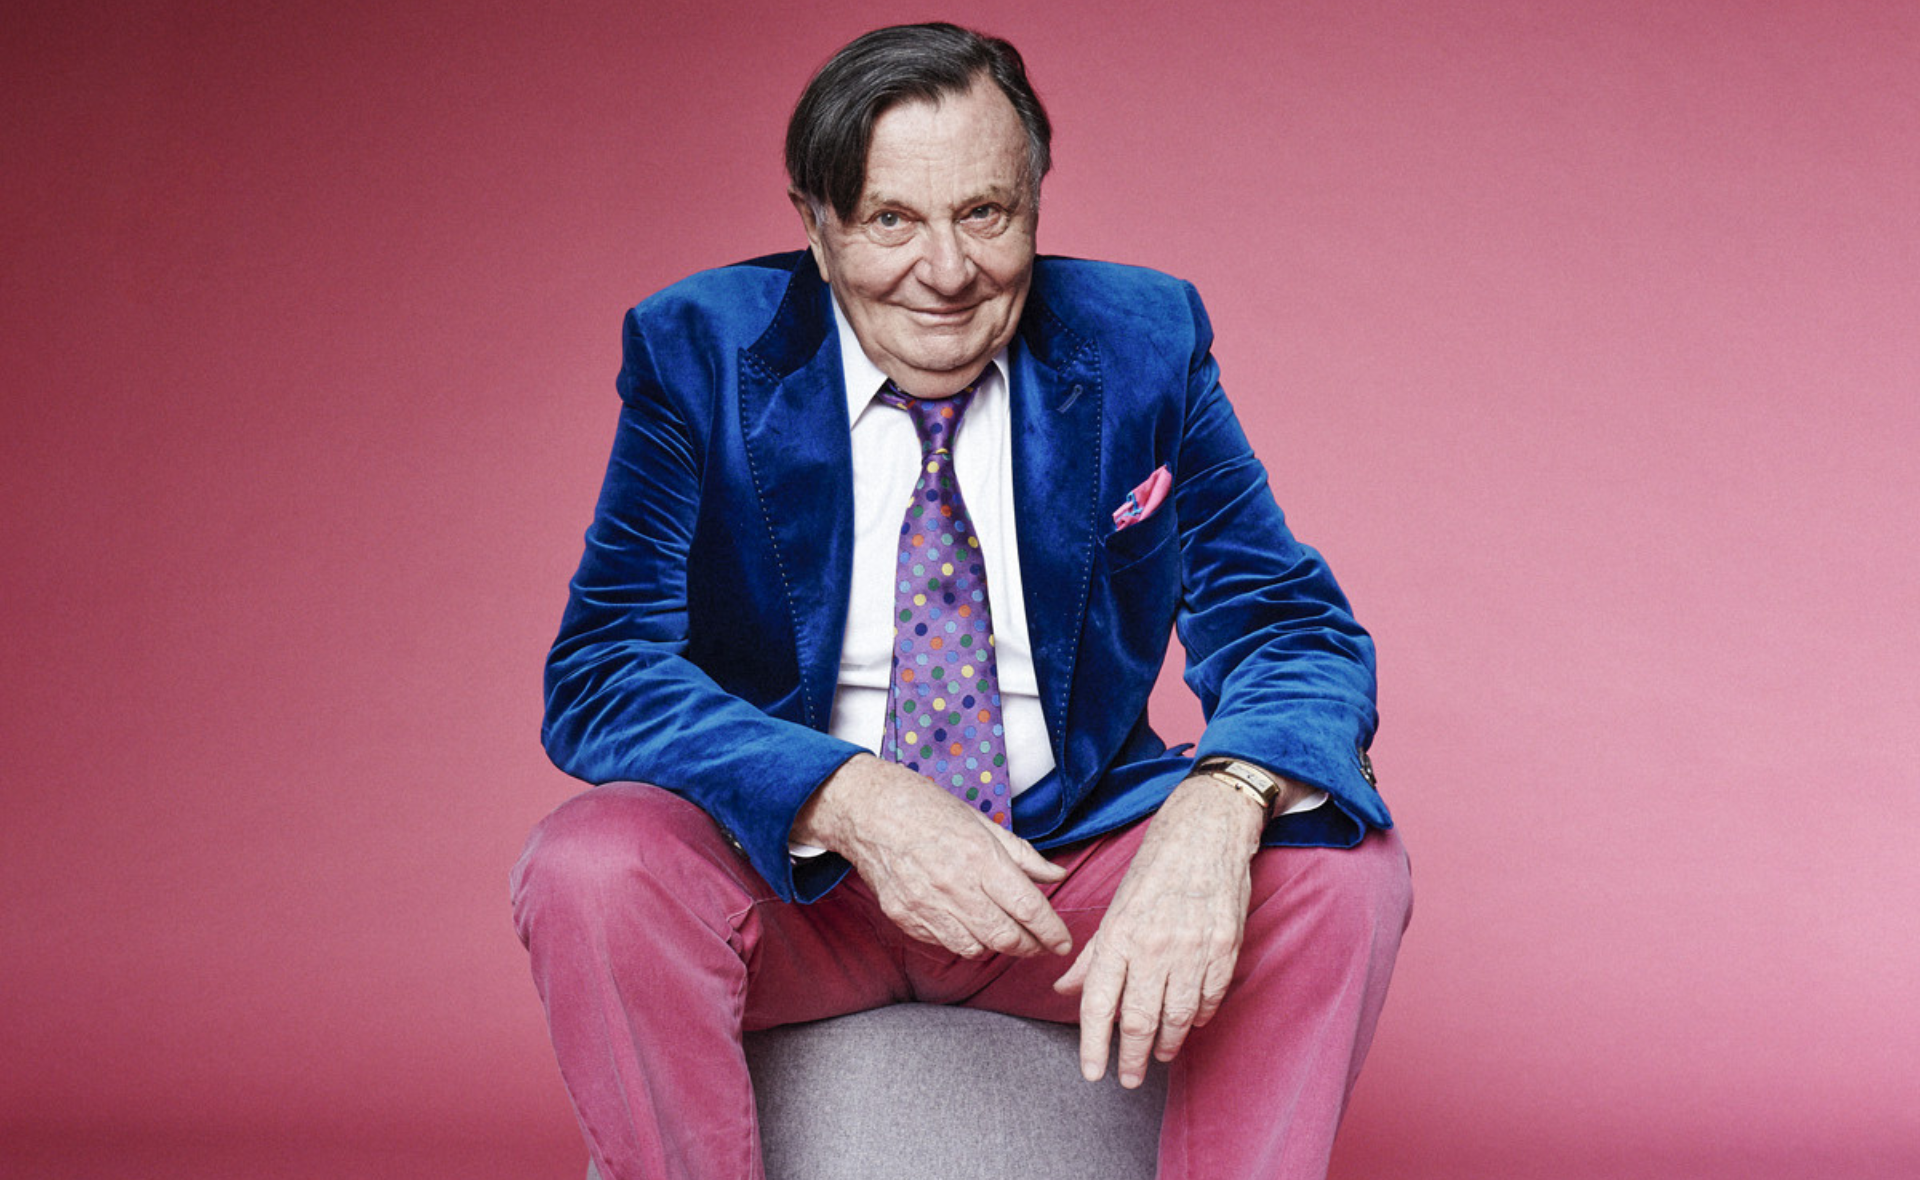 EXCLUSIVE: Barry Humphries’ best friend Kathy Lette talks about his legacy and their close friendship